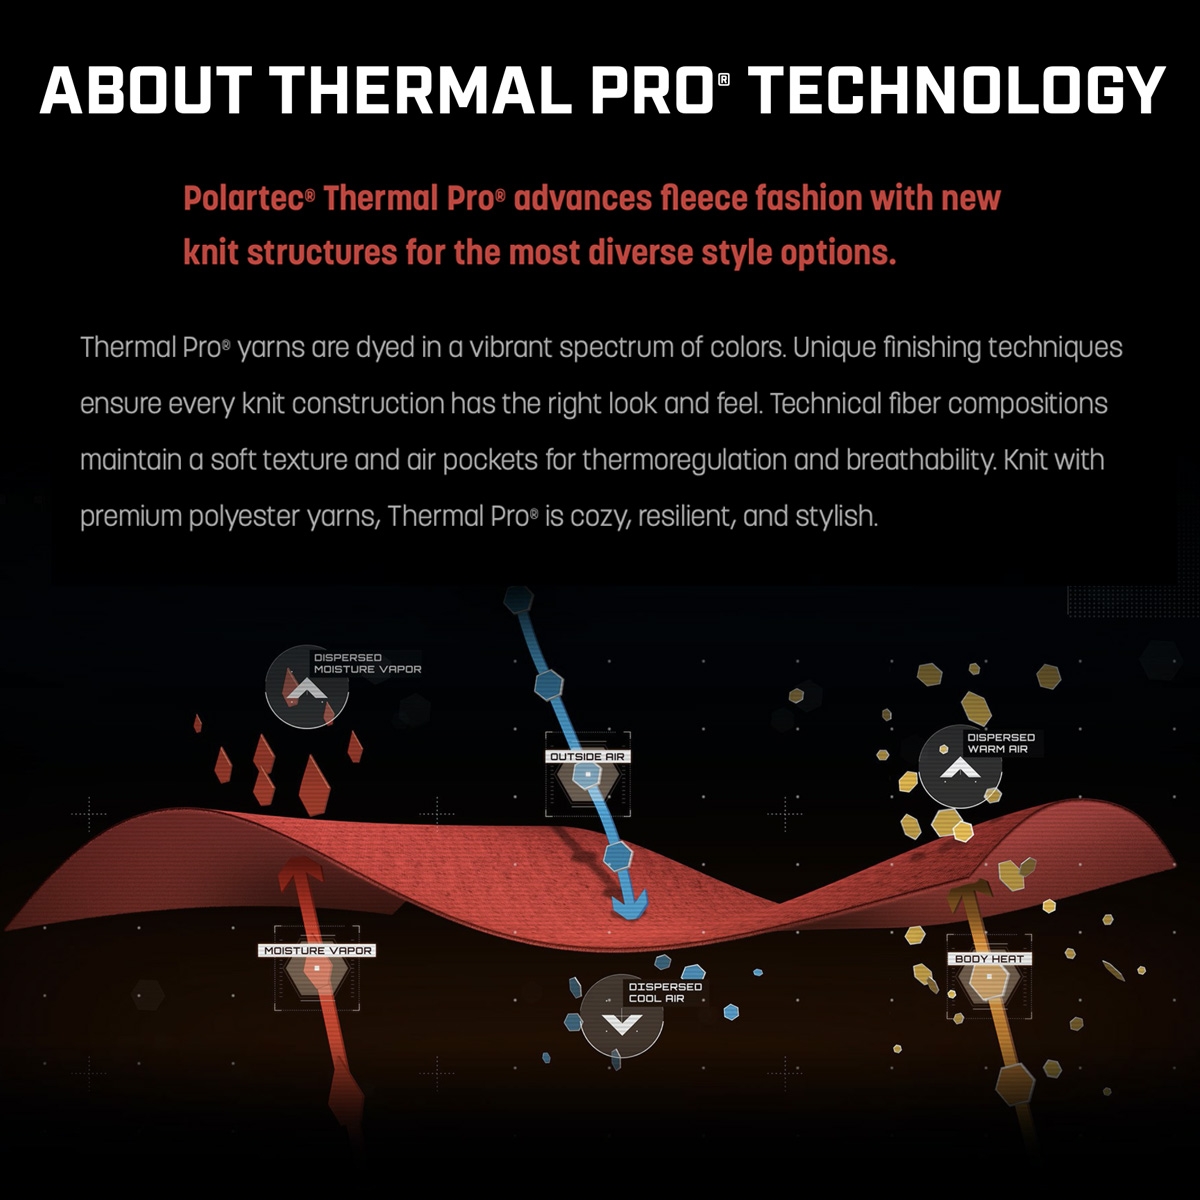 Polartec Thermal Pro Technology, lightweight and quick-drying